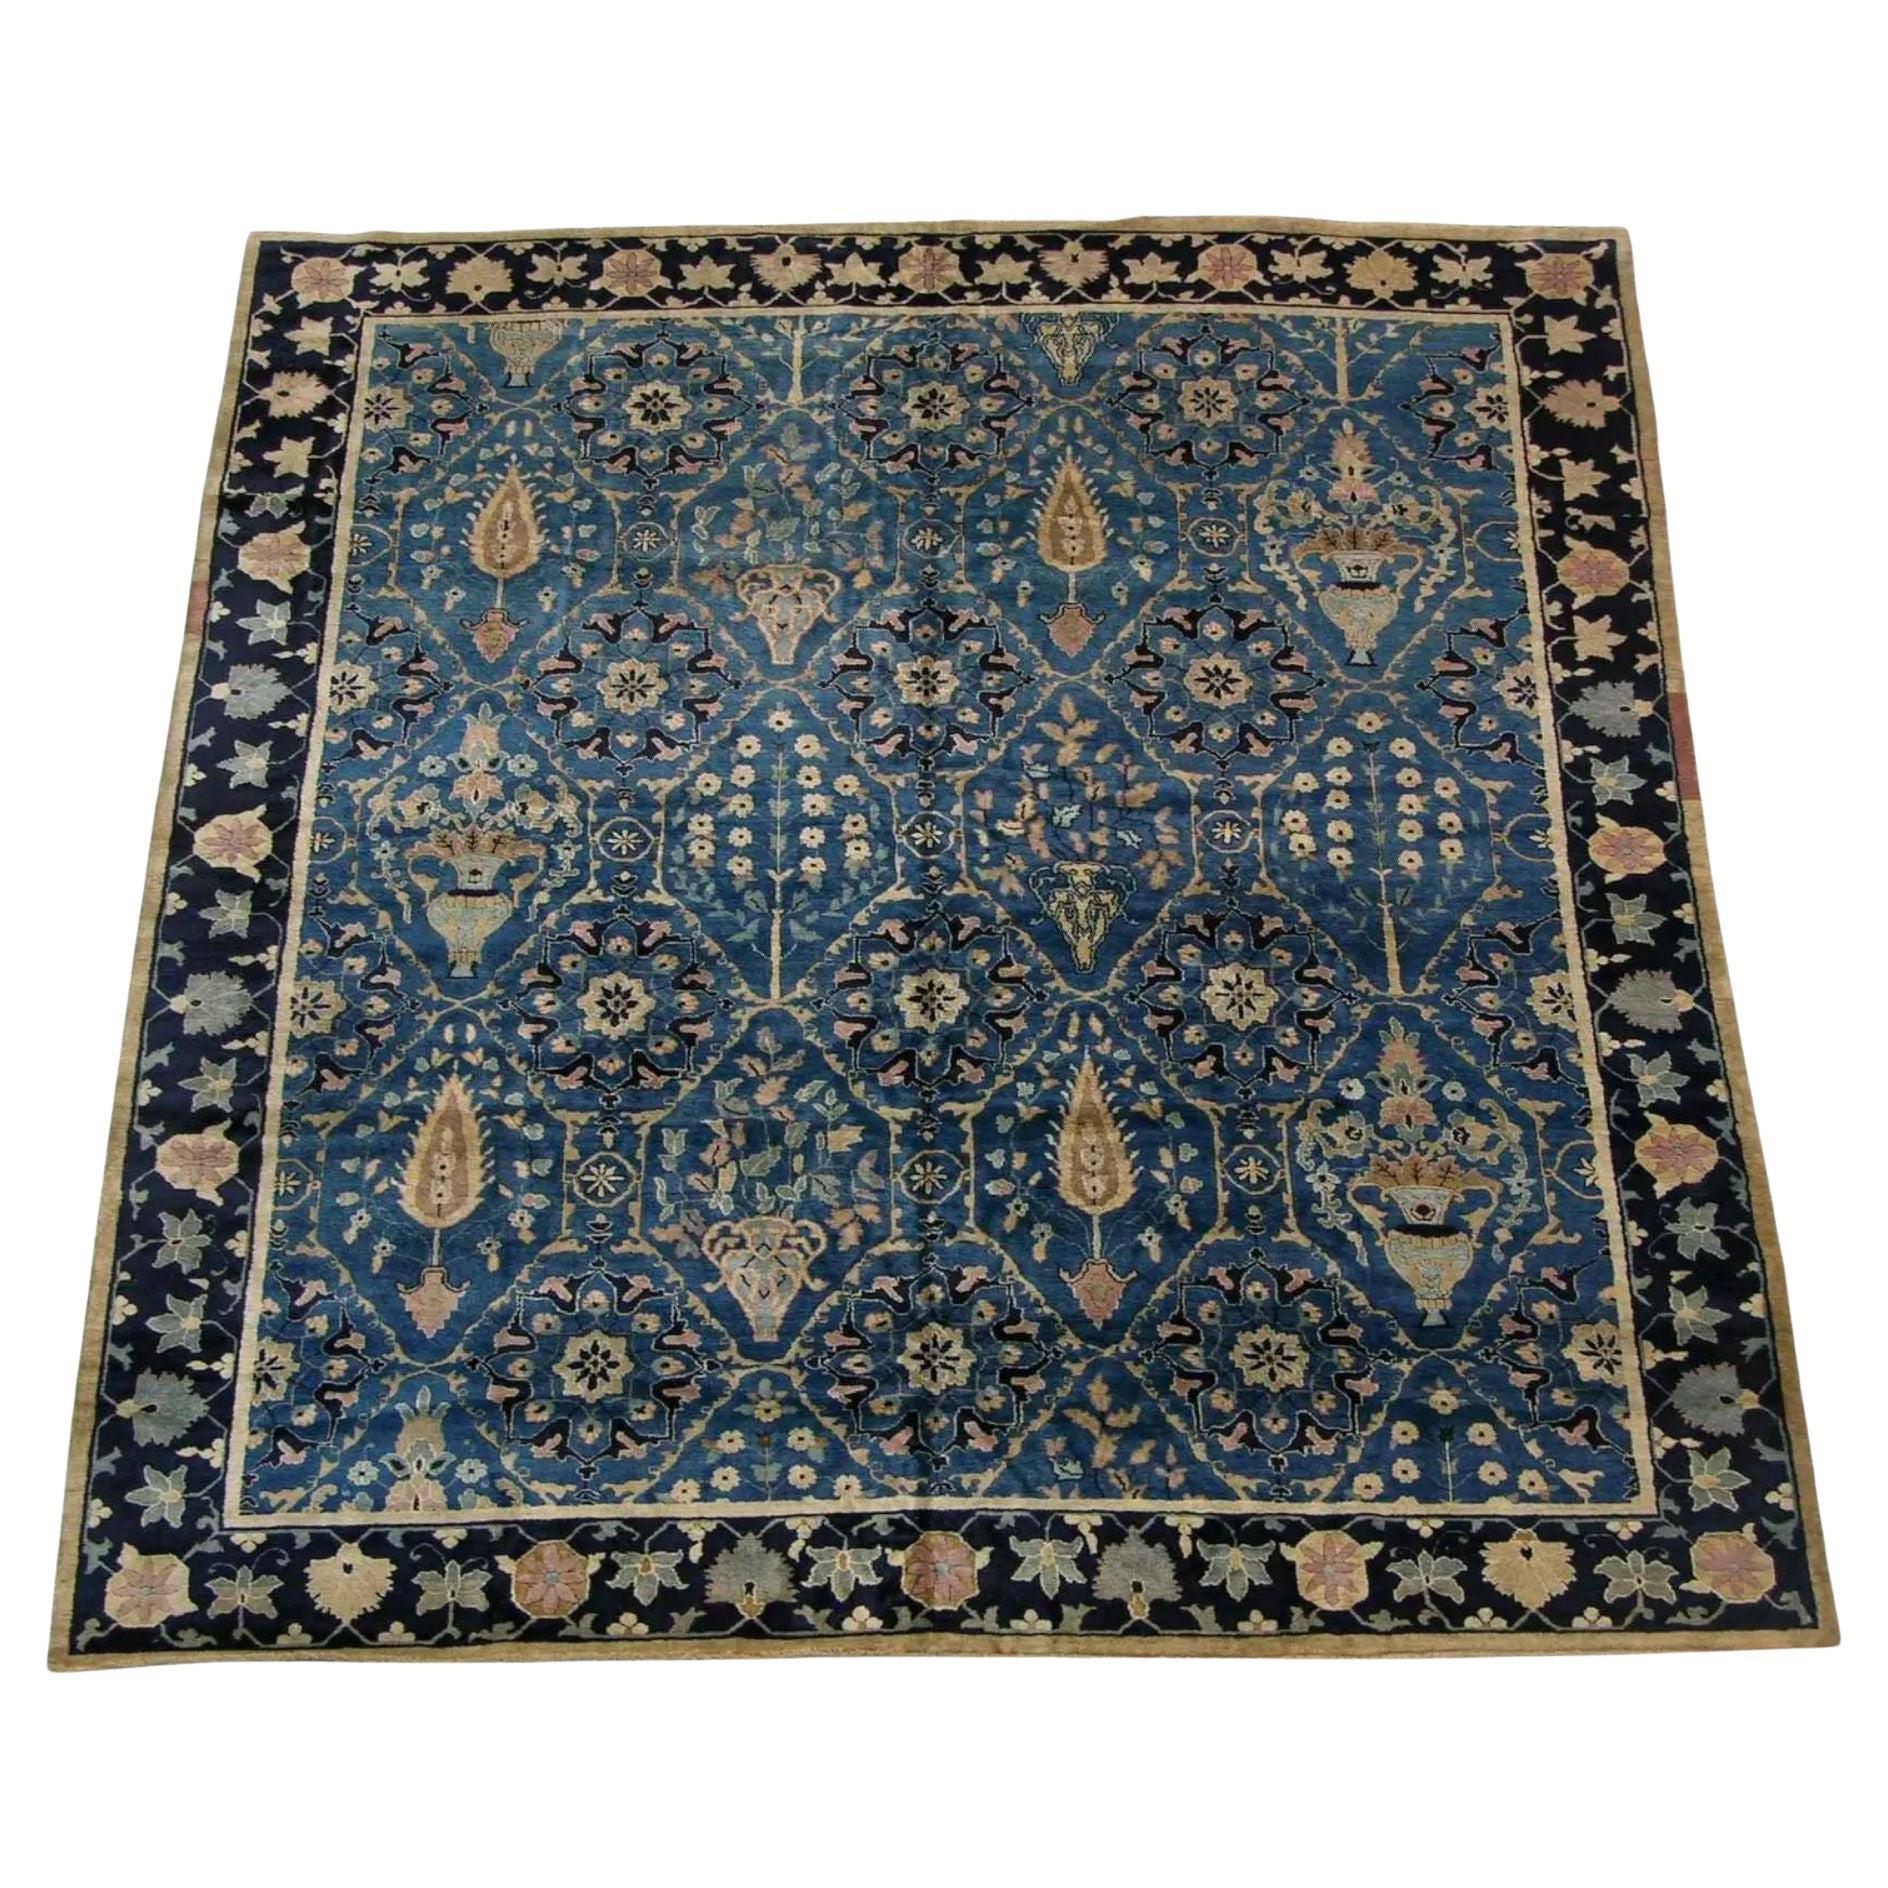 1990s Vintage Decorative Chinese Rug with Floral Design 10′2″ × 11′2″ For Sale